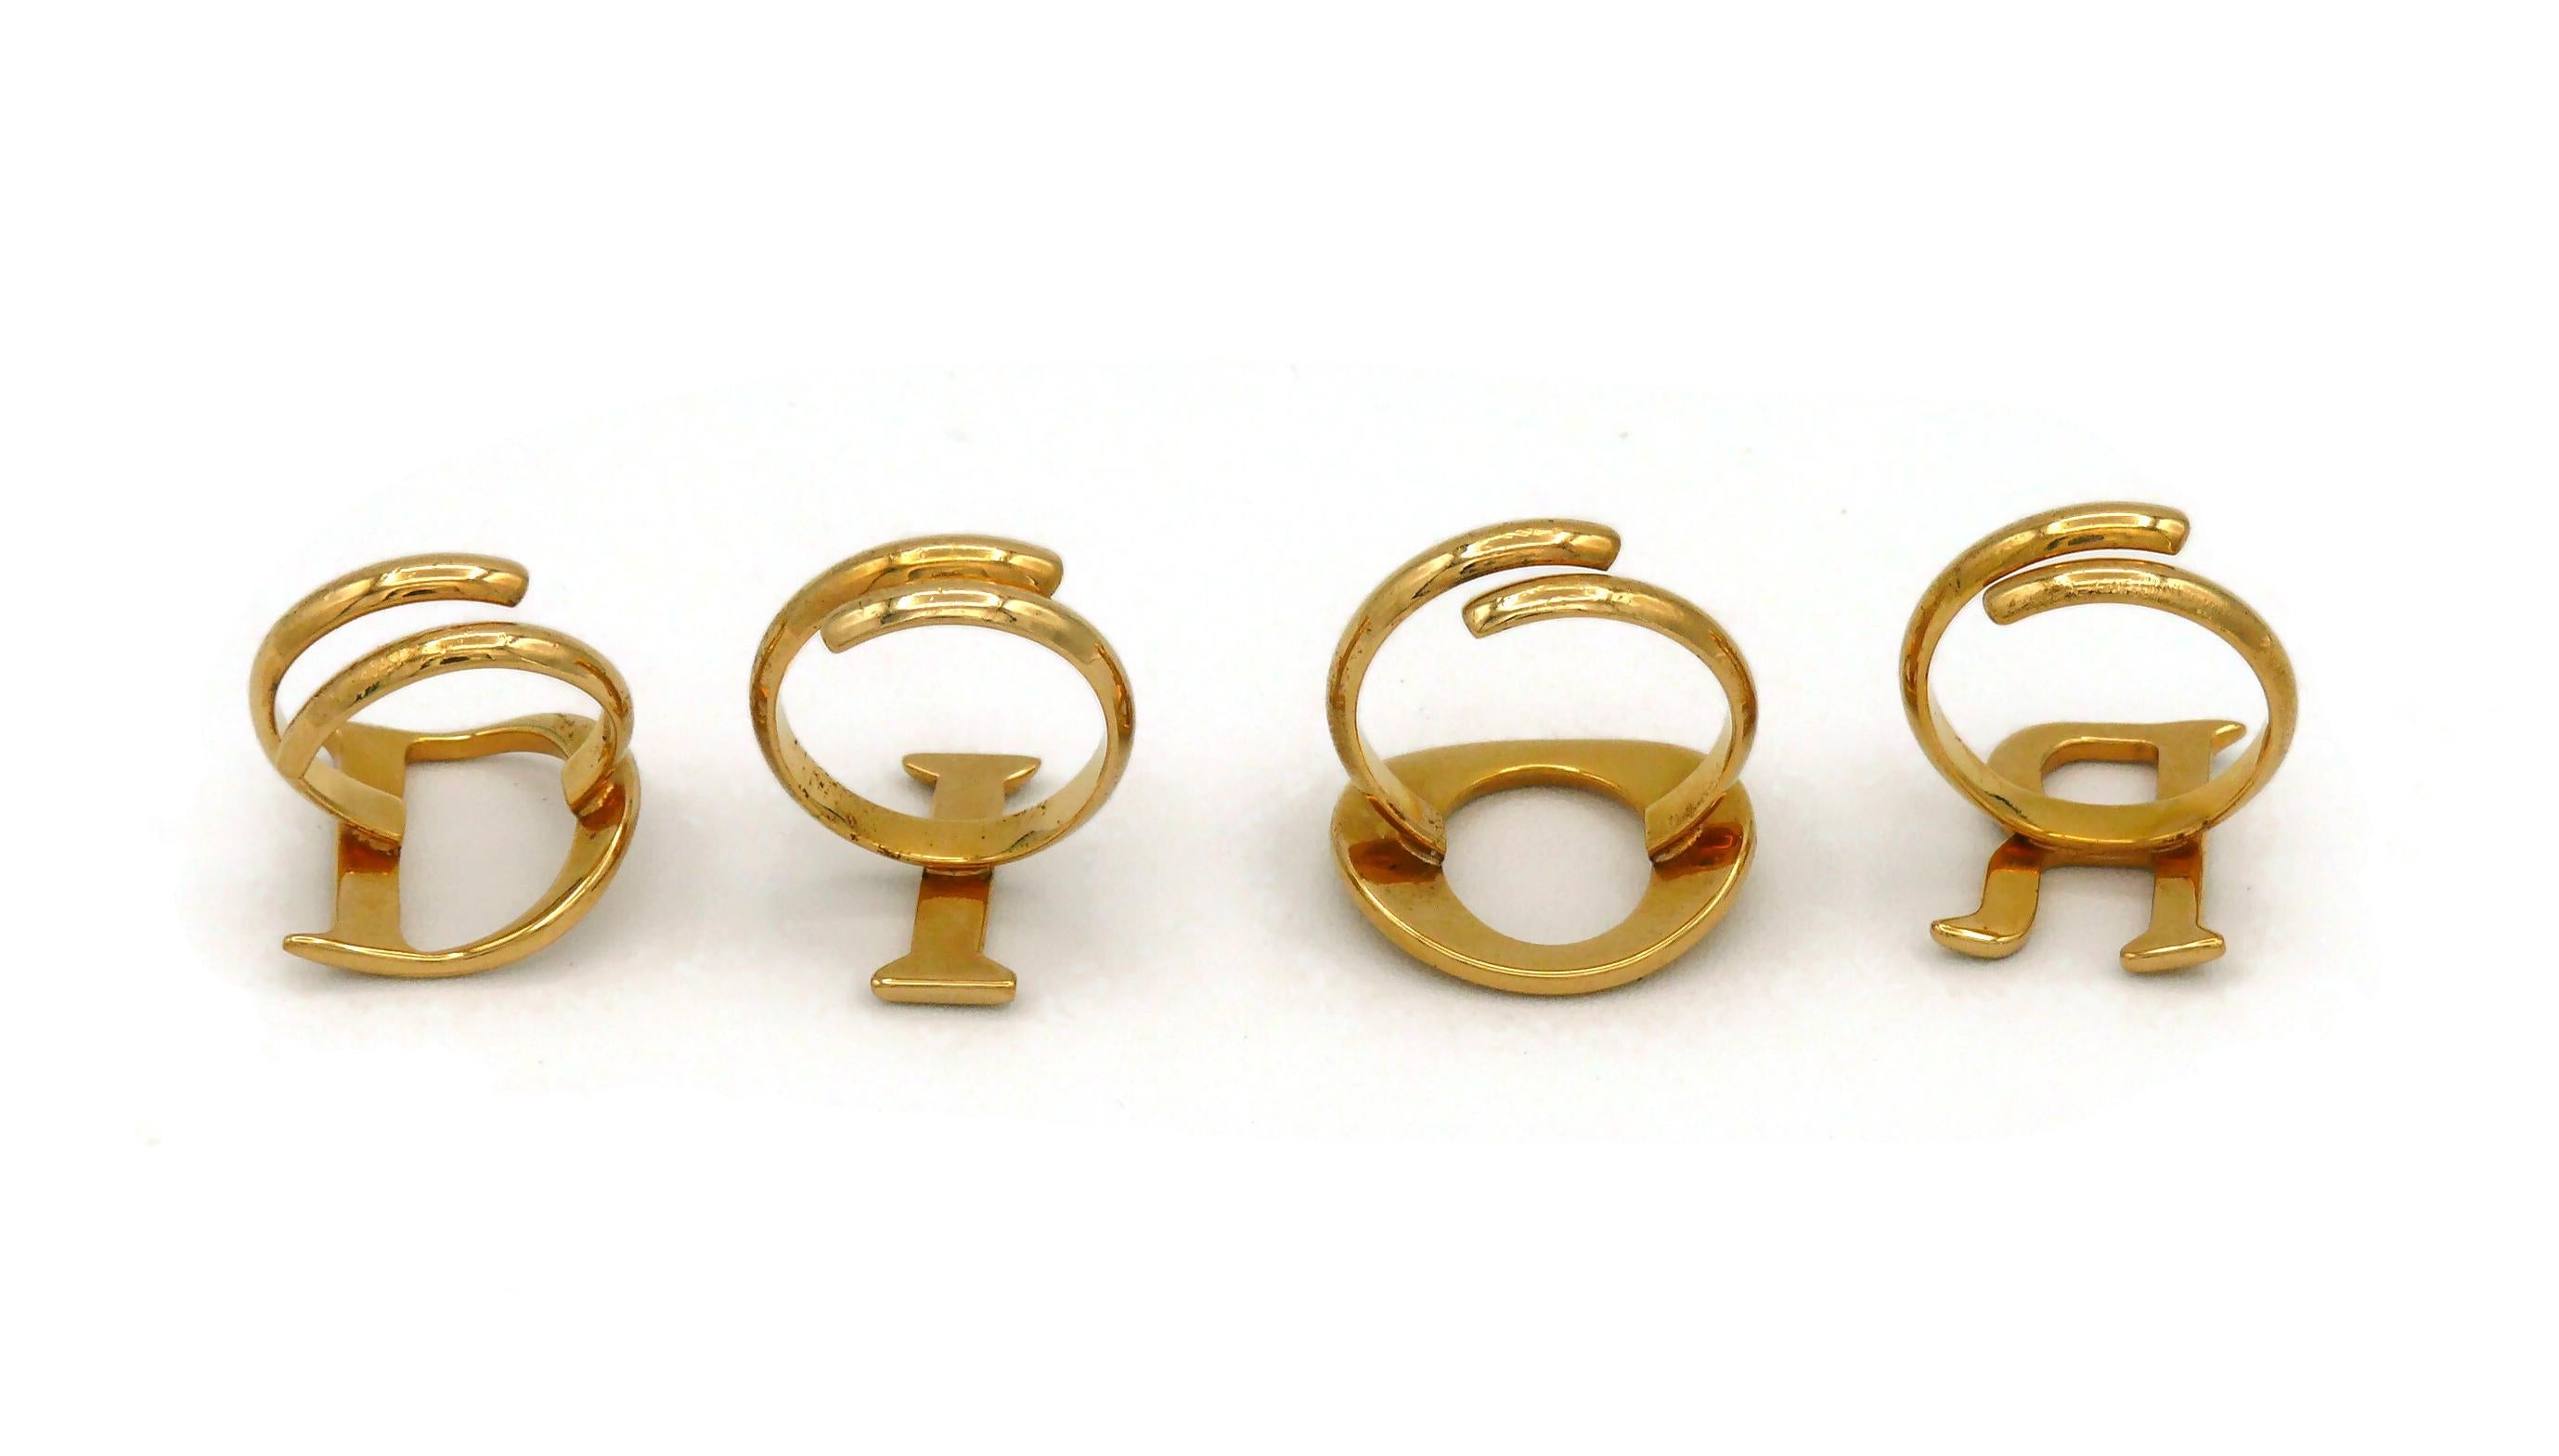 CHRISTIAN DIOR by JOHN GALLIANO Vintage God Toned Dior Letter Ring Set Boxed 1